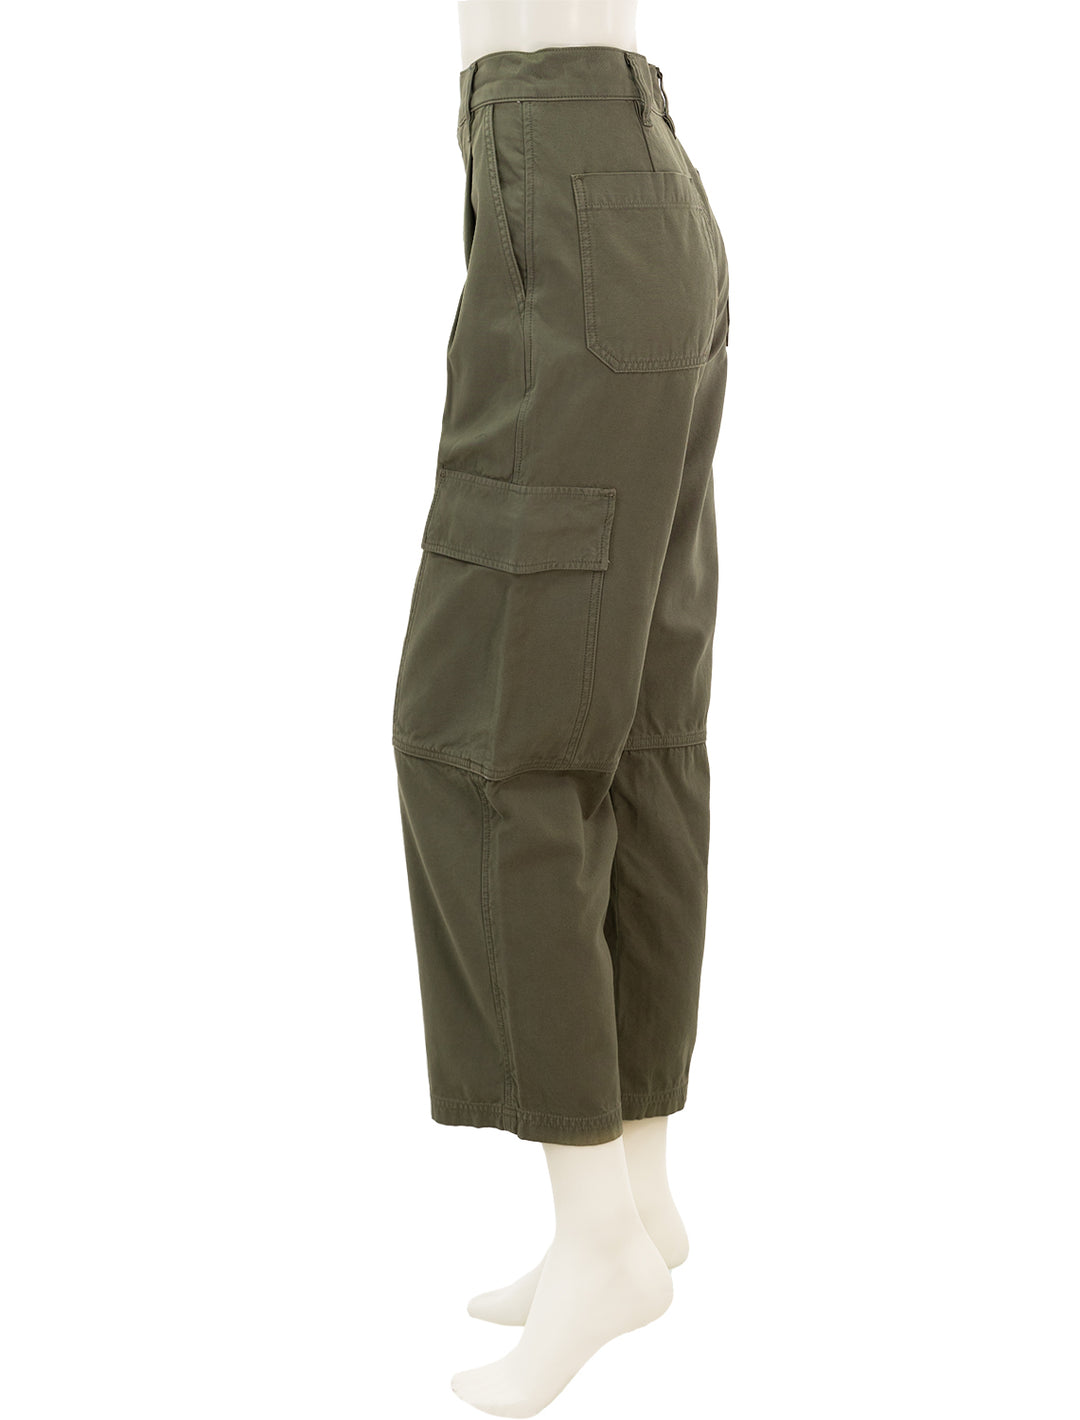 Side view of AGOLDE's jericho pant in fatigue.